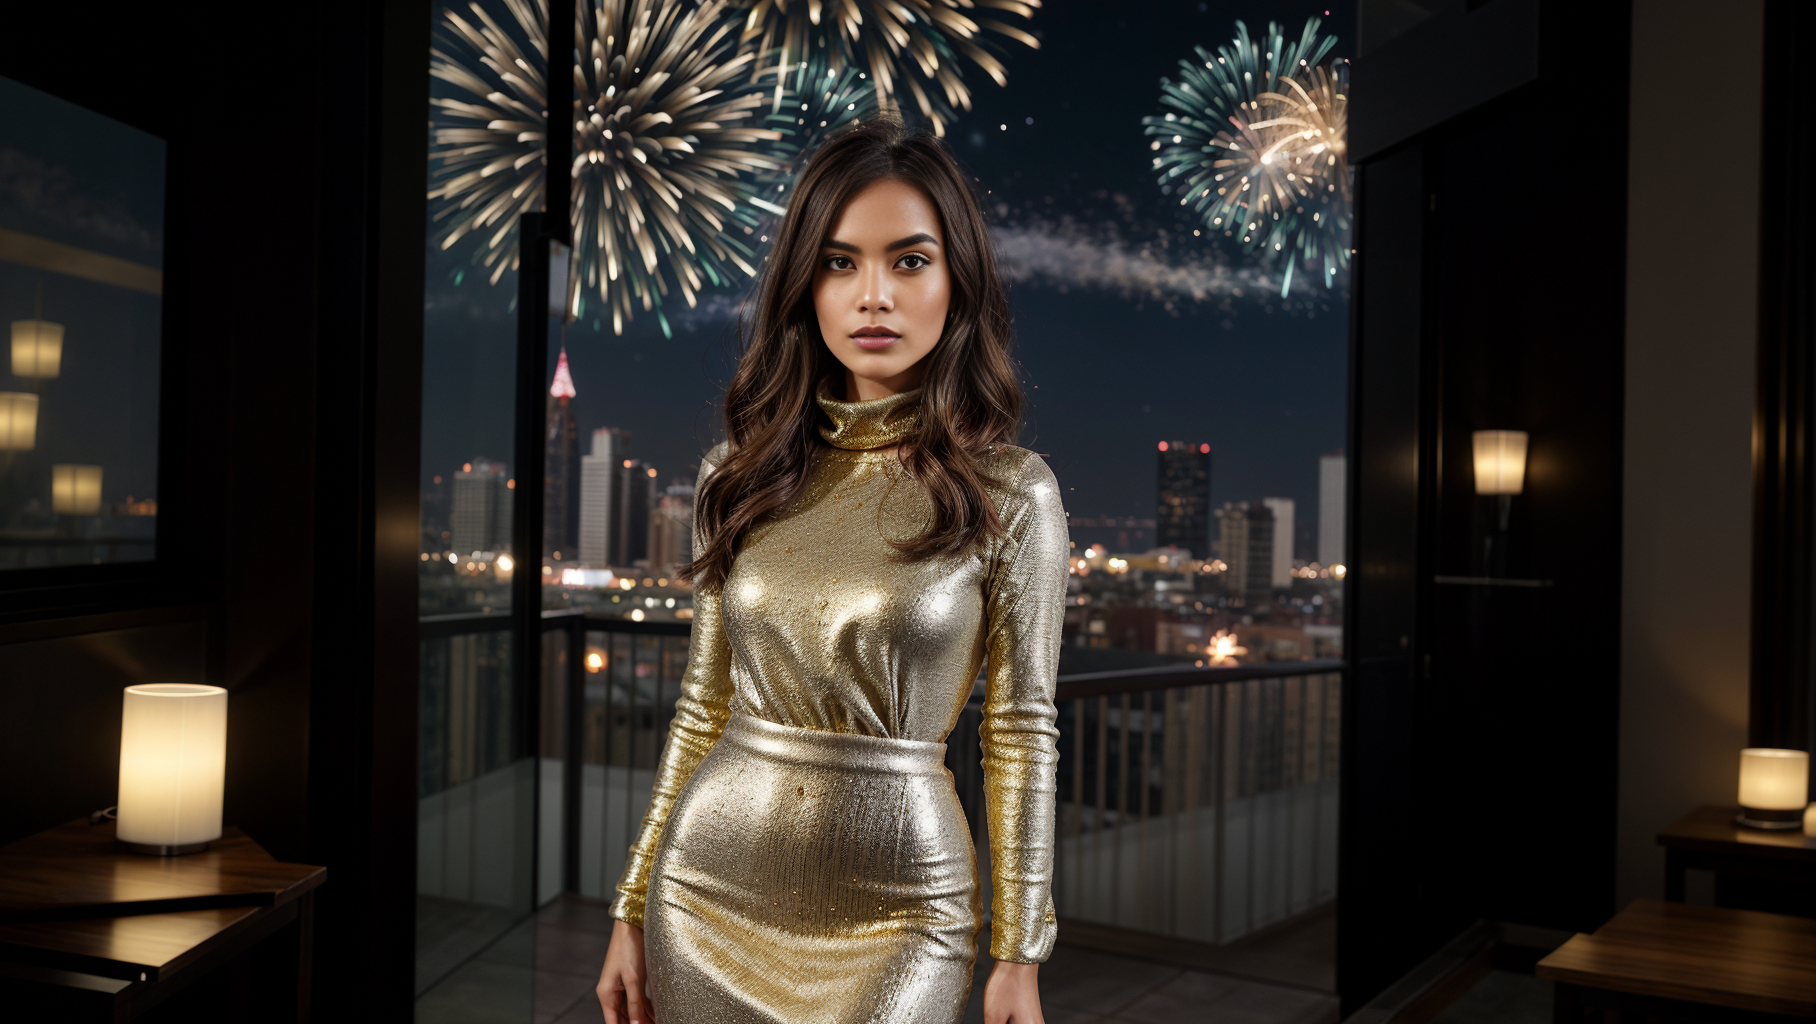 Emily Rodriguez in a shimmering gold dress indoors with a backdrop of cityscape and New Year's fireworks through the window.